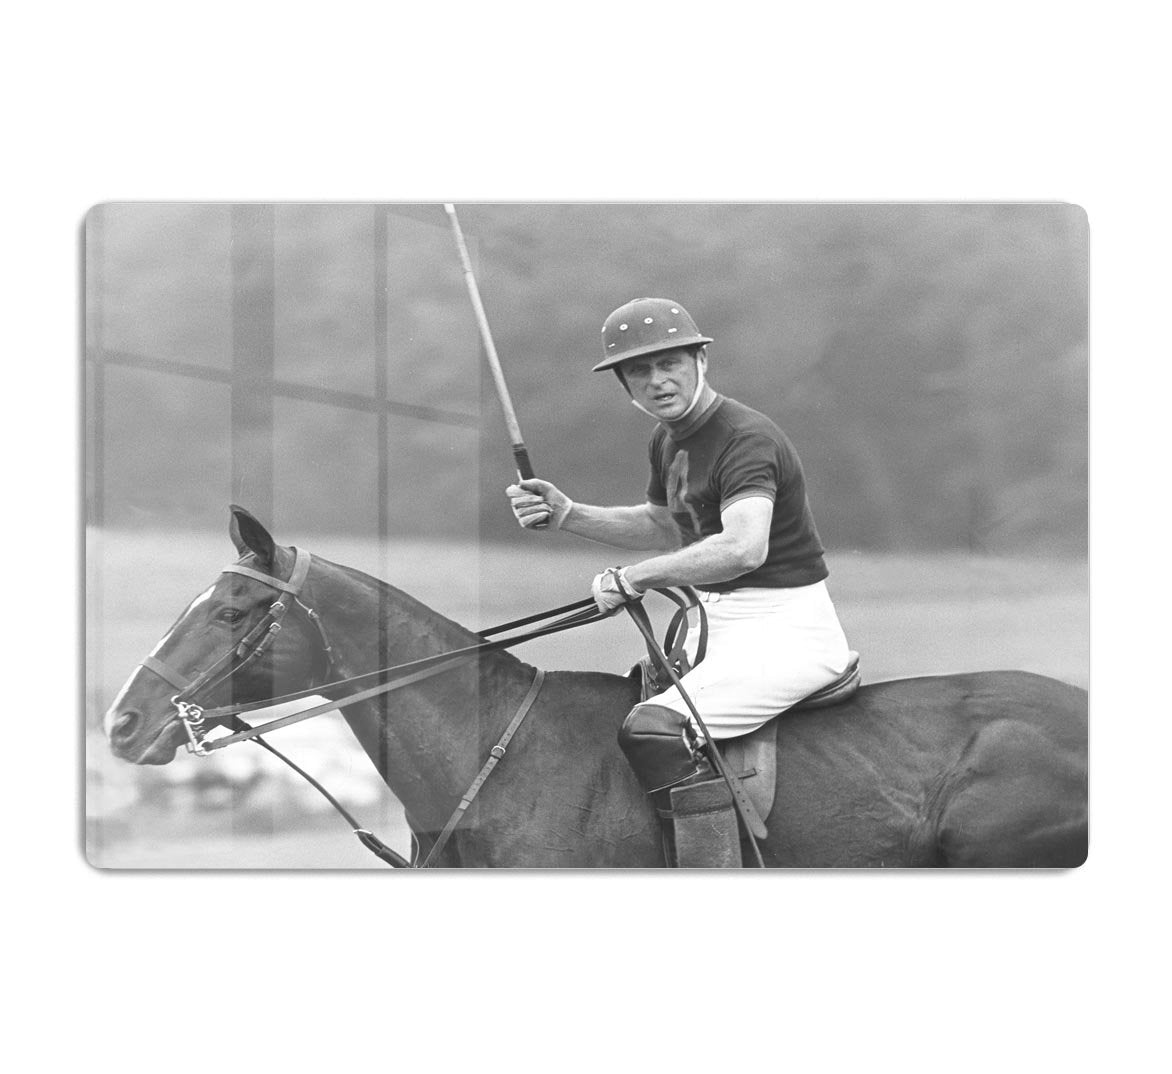 Prince Philip shown winning the polo Gold Cup HD Metal Print